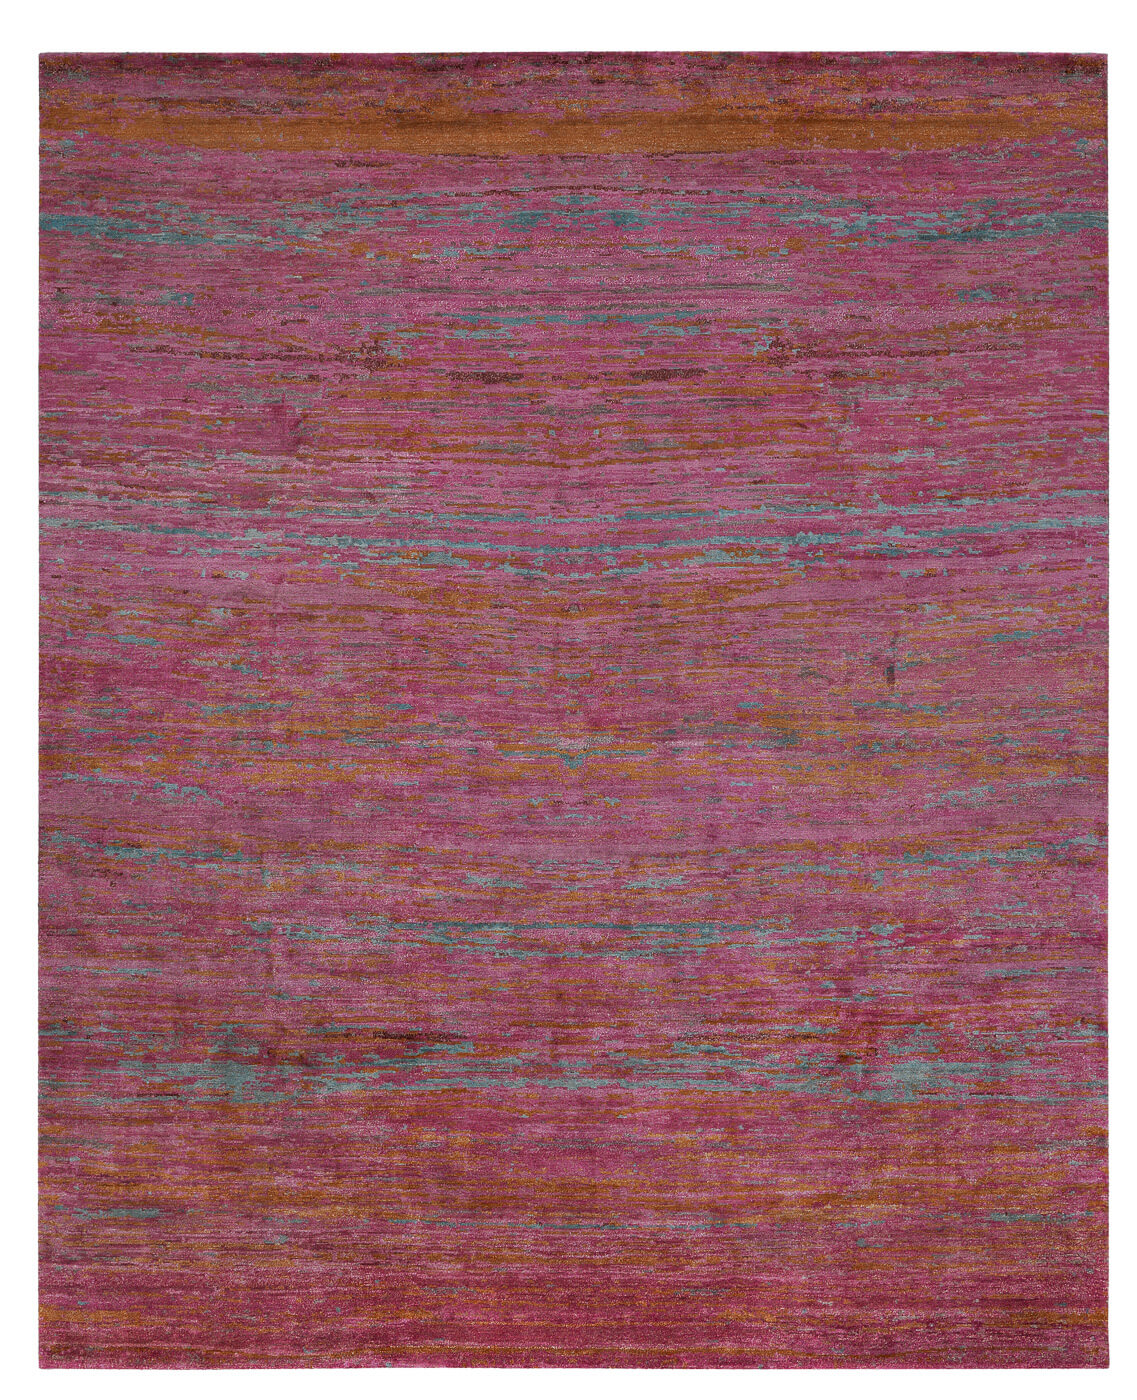 Hand-woven Vintage Style Pink Luxury Rug ☞ Size: 300 x 400 cm